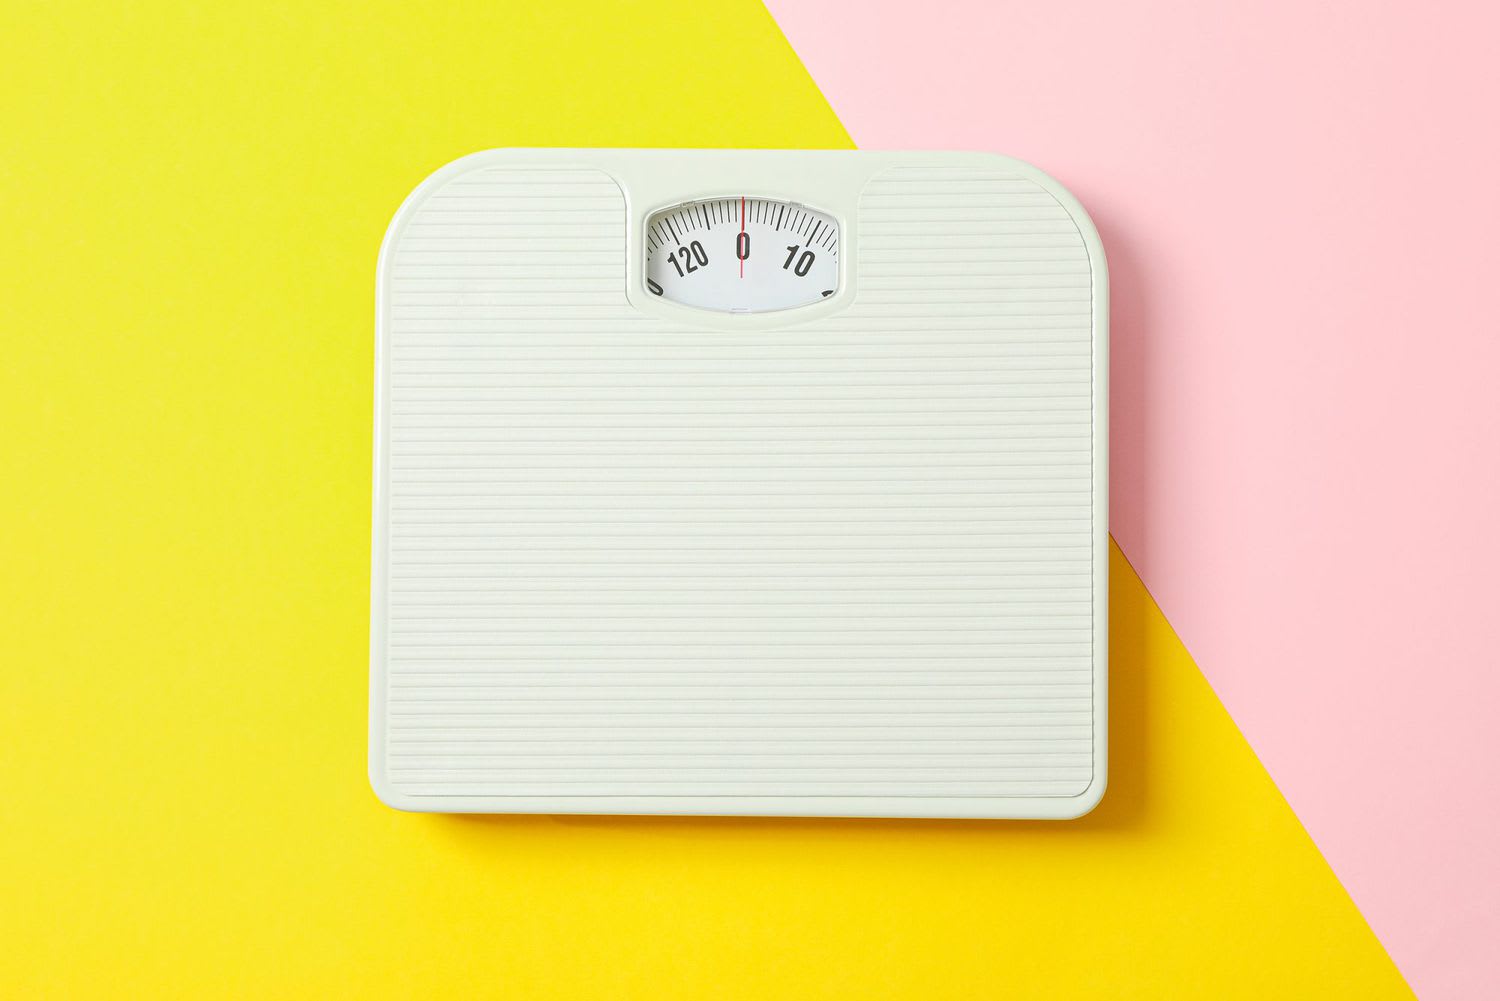 Losing Weight Is Harder if You're Over 40—Here Are 5 Tips That Work